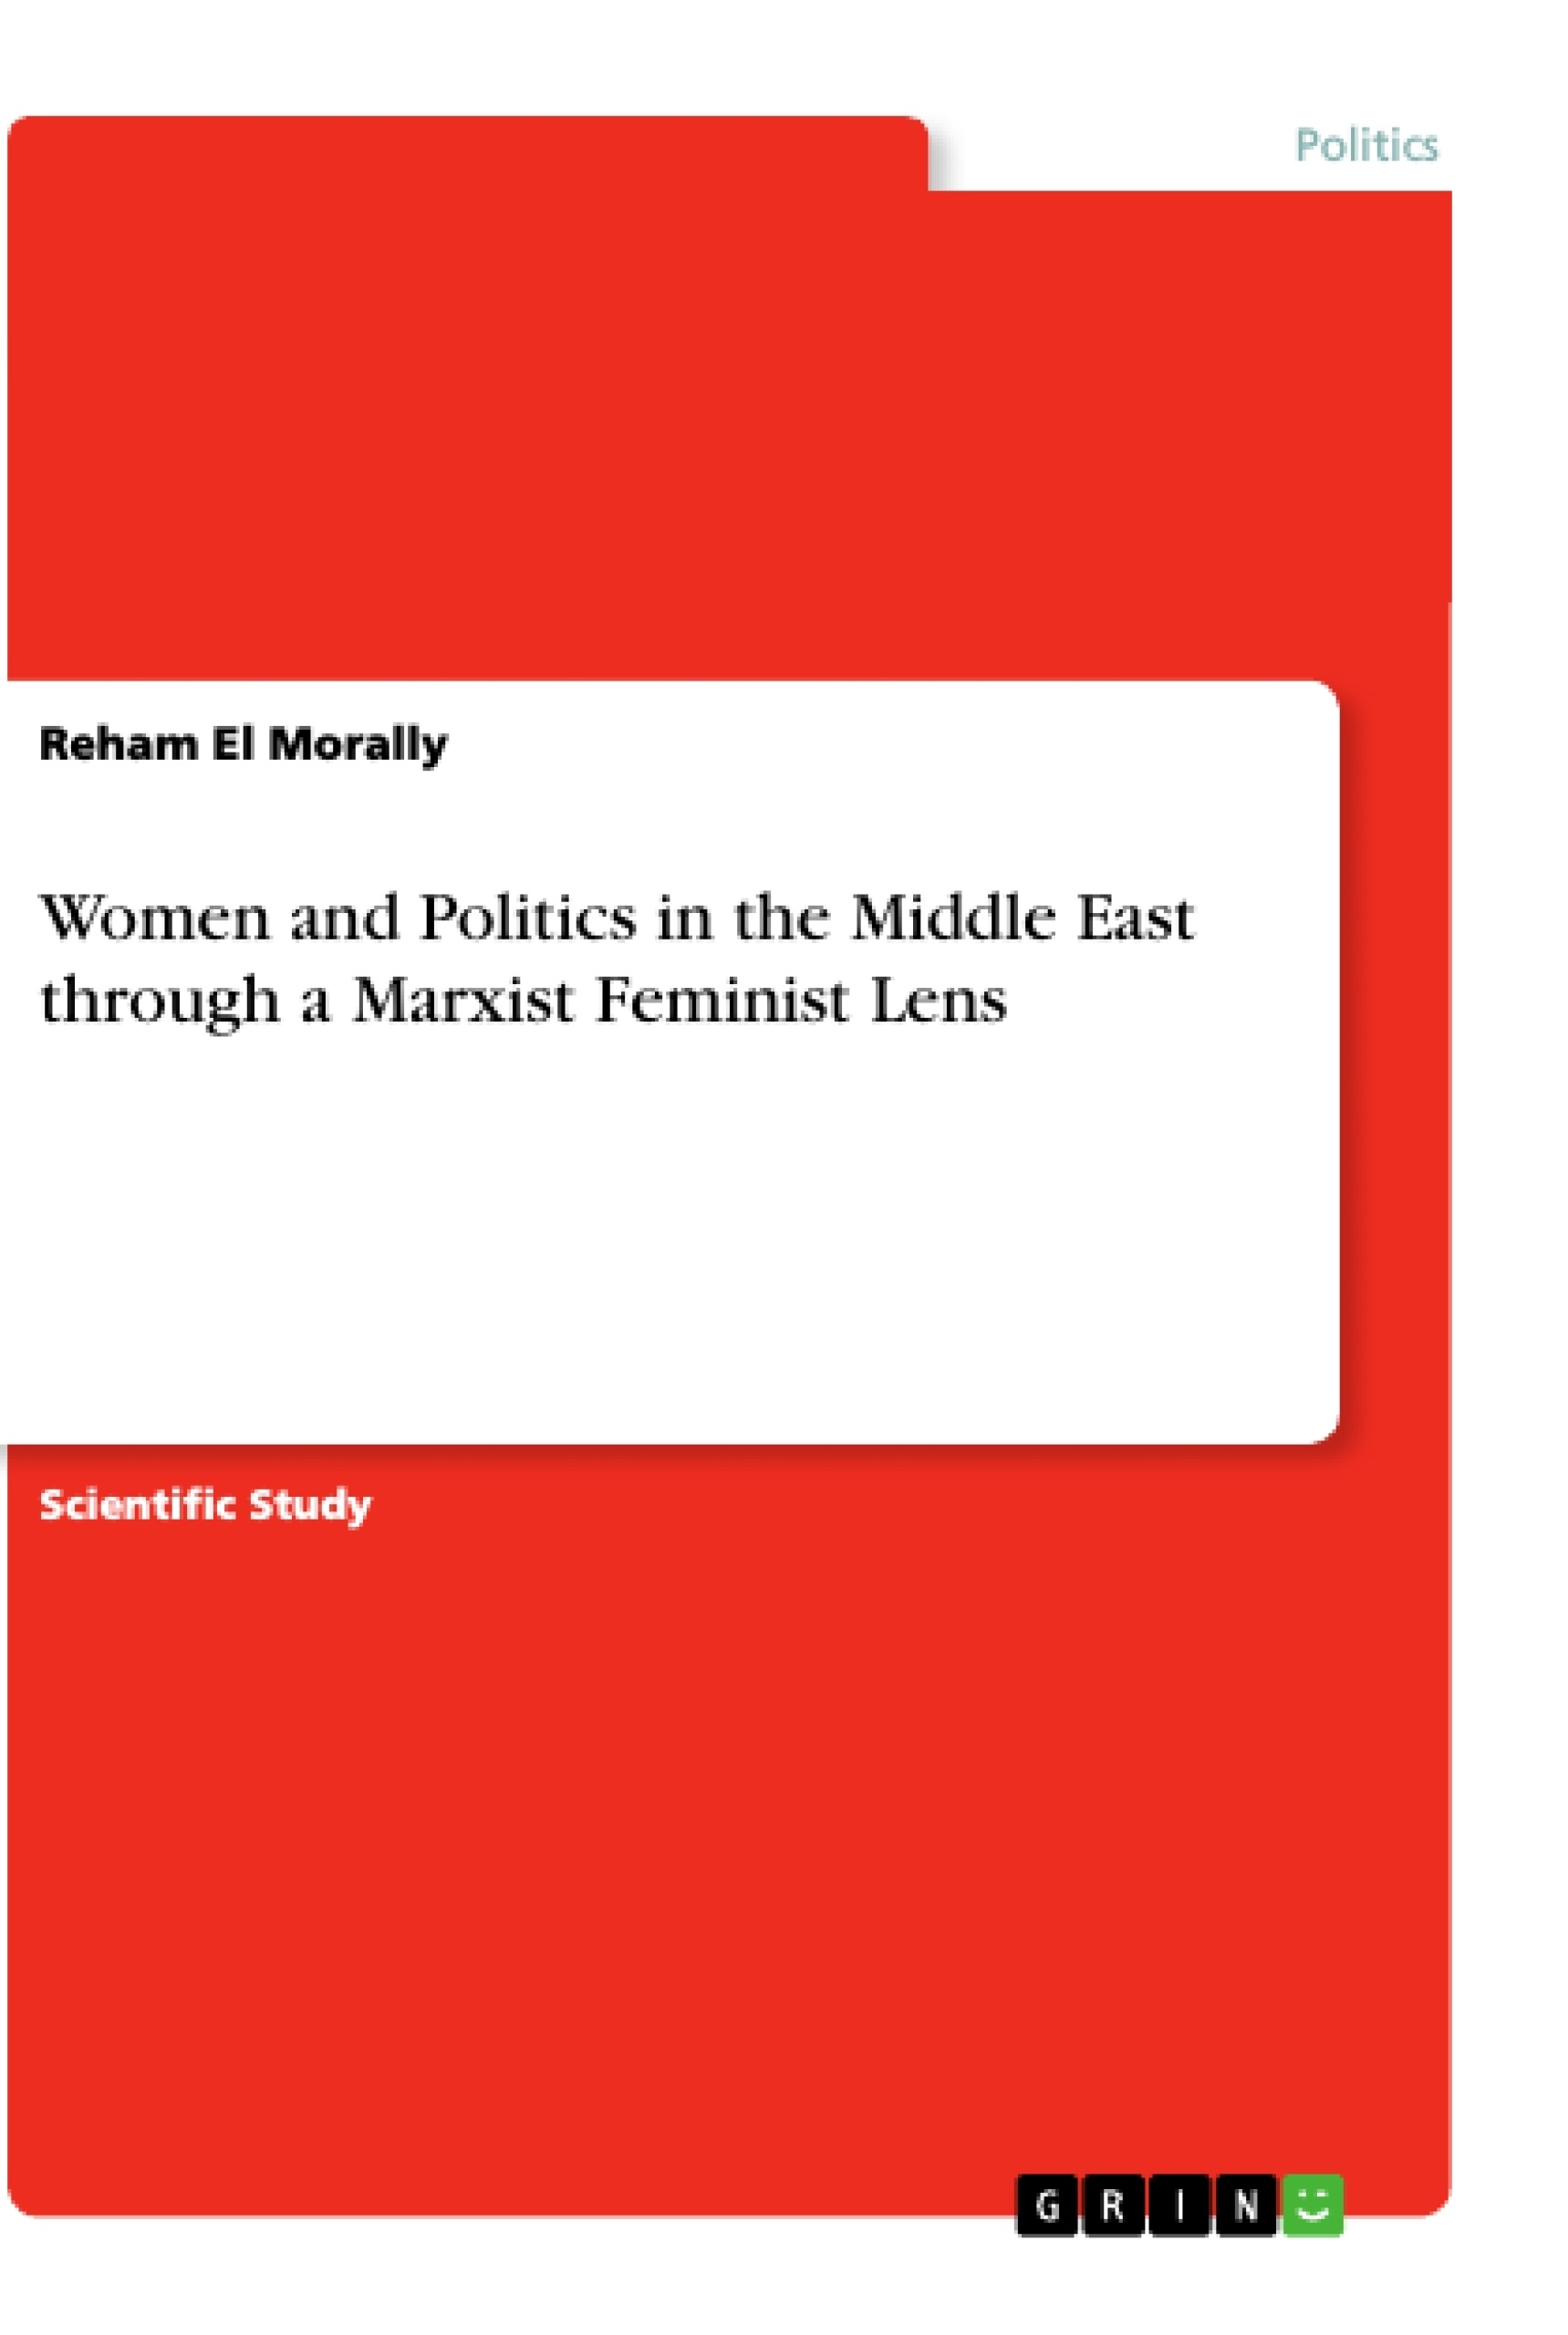 Titel: Women and Politics in the Middle East through a Marxist Feminist Lens